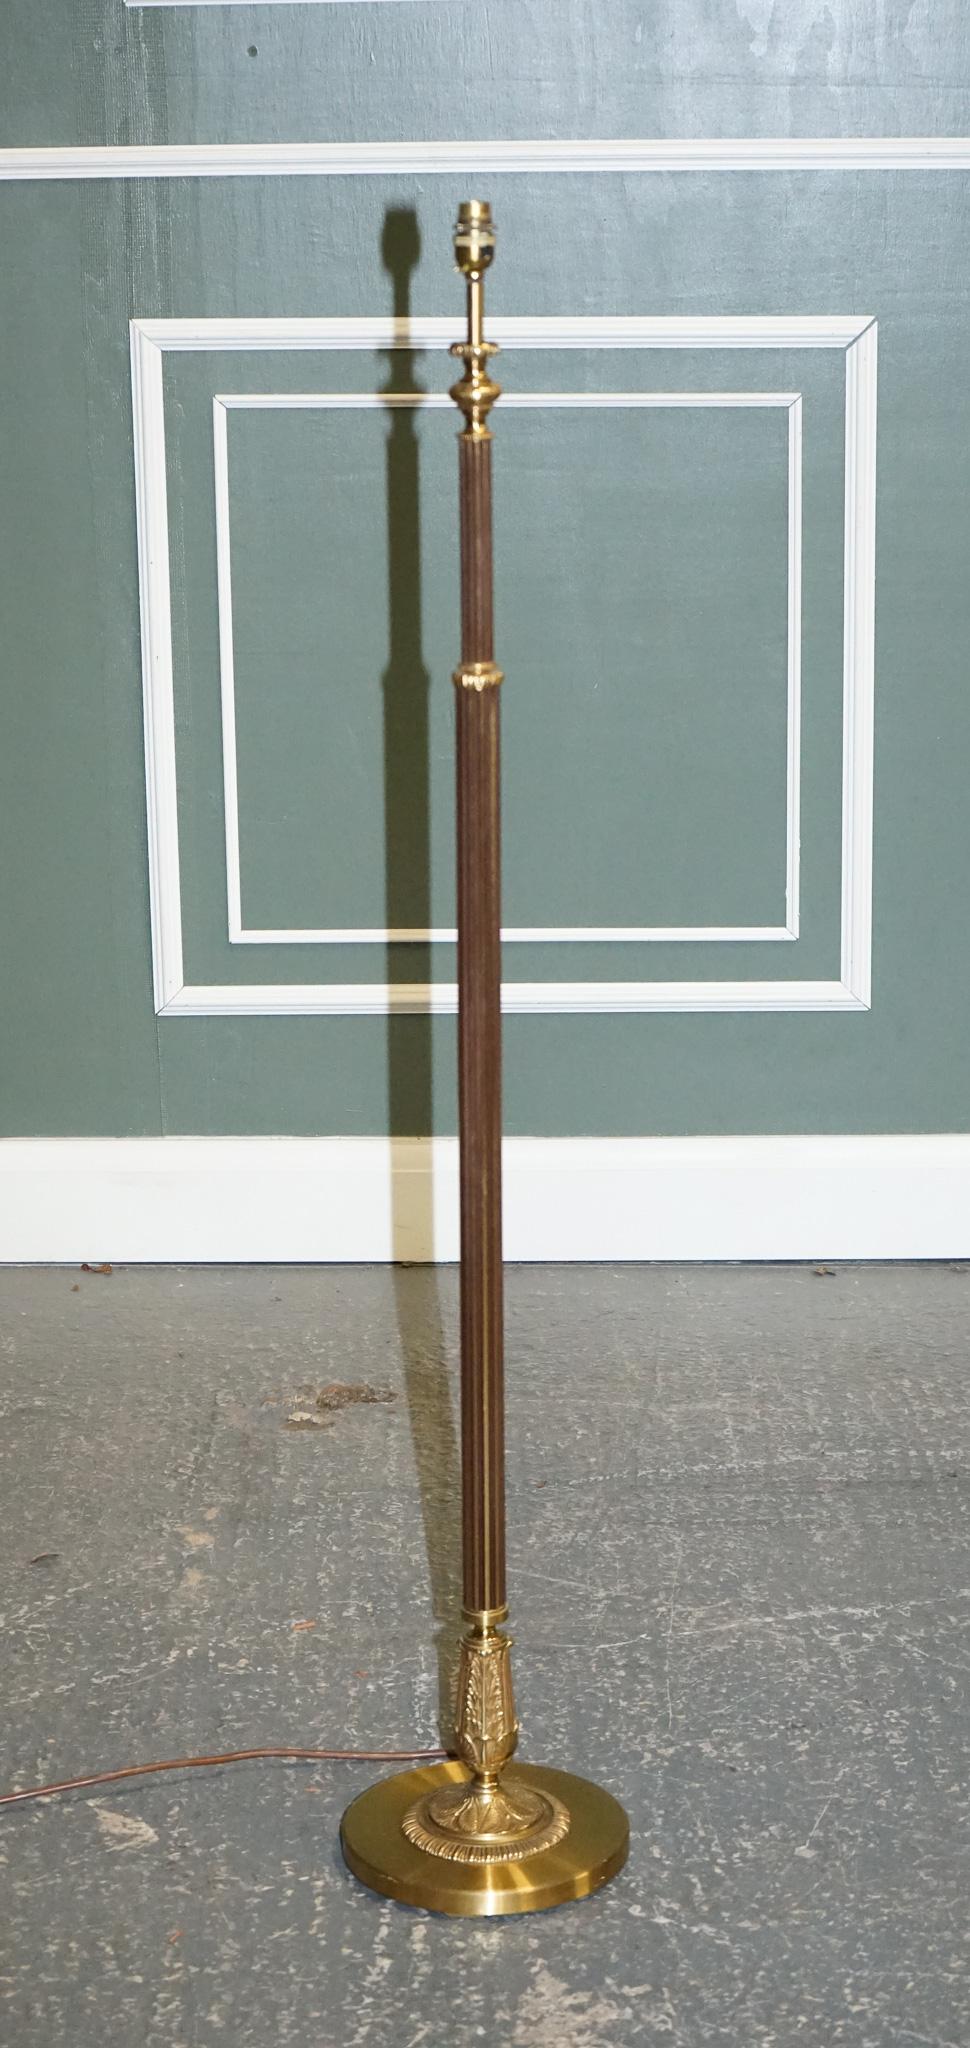 We are delighted to offer for sale this Beautiful Vintage Brass Floor Lamp.

We have lightly restored this by cleaning it all over, waxing and hand polishing.

Please carefully examine the pictures to see the condition before purchasing, as they